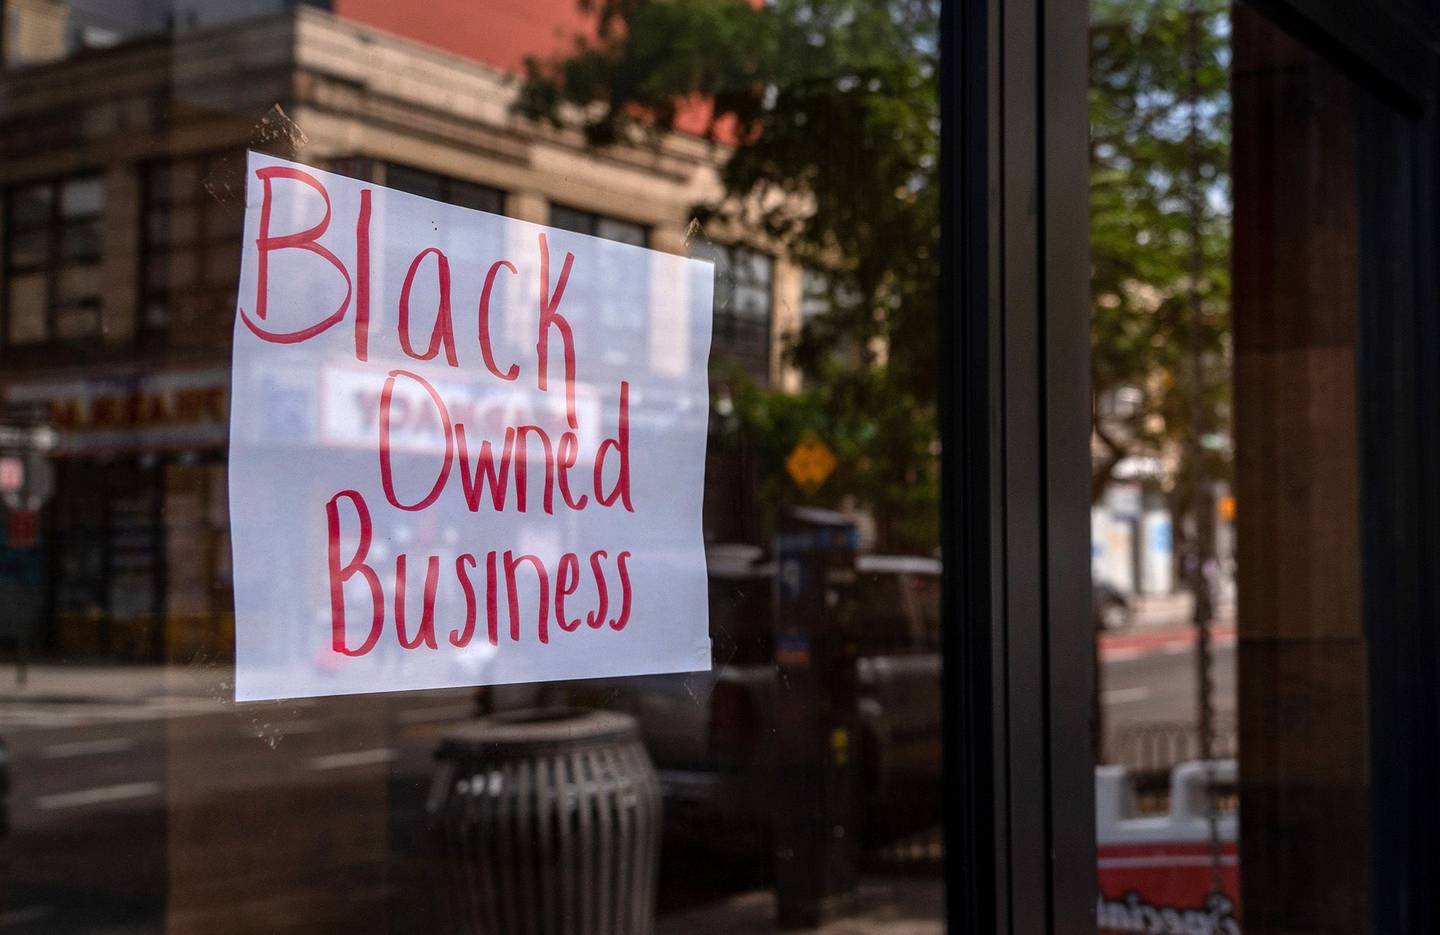 A "Black Owned Business" sign is displayed in the window of a restaurant in the Bedford-Stuyvesant neighborhood in the Brooklyn borough of New York.